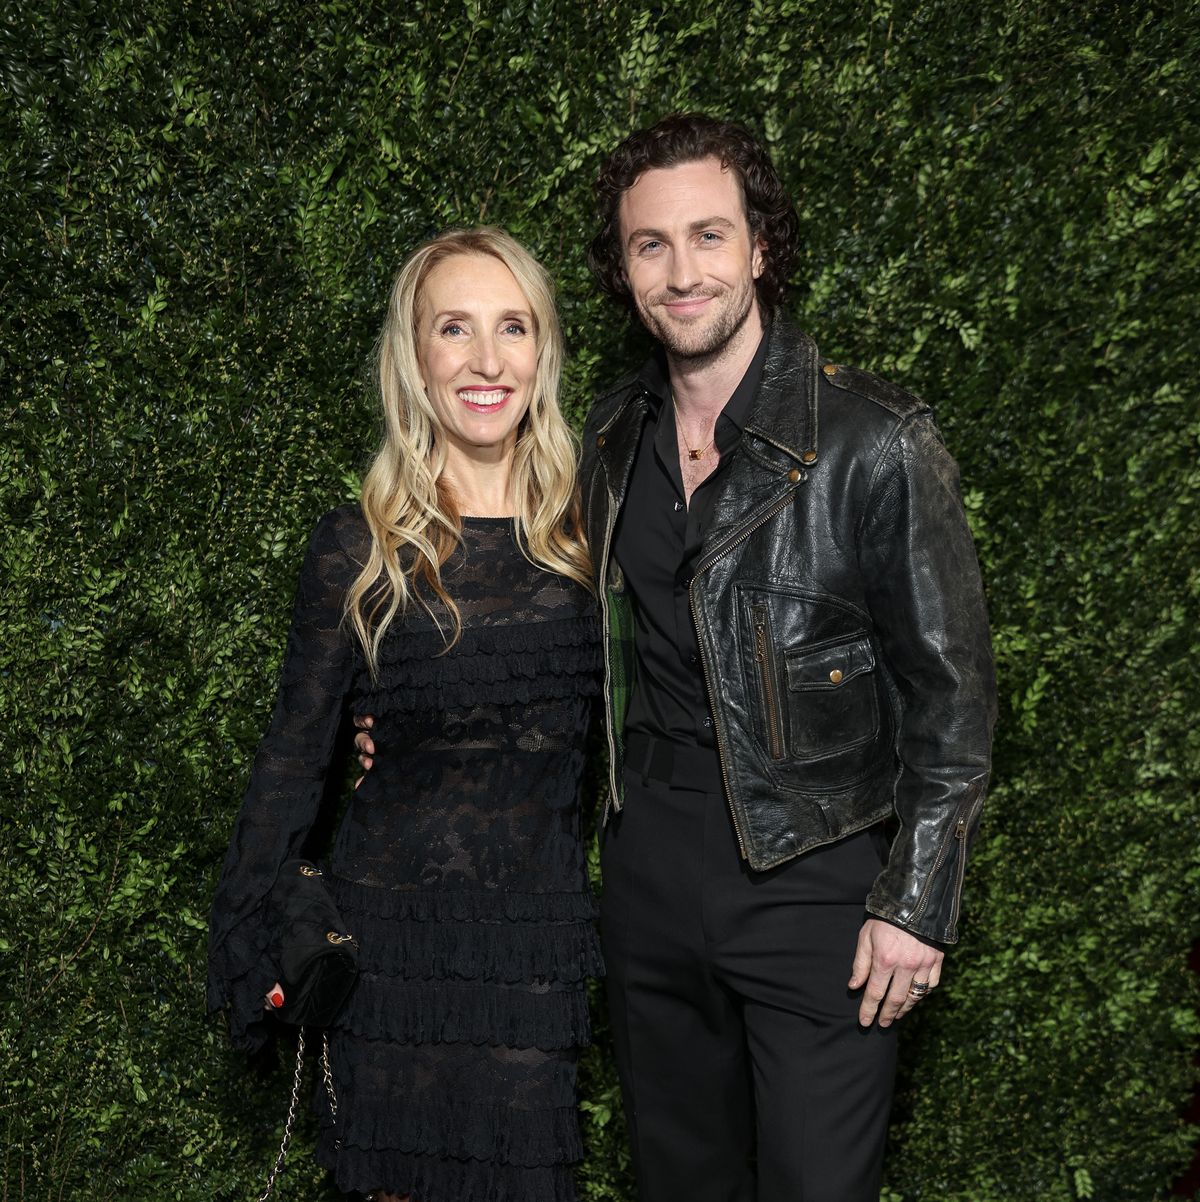 sam taylor johnson and aaron taylor johnson attend pre bafta party and pose for photos